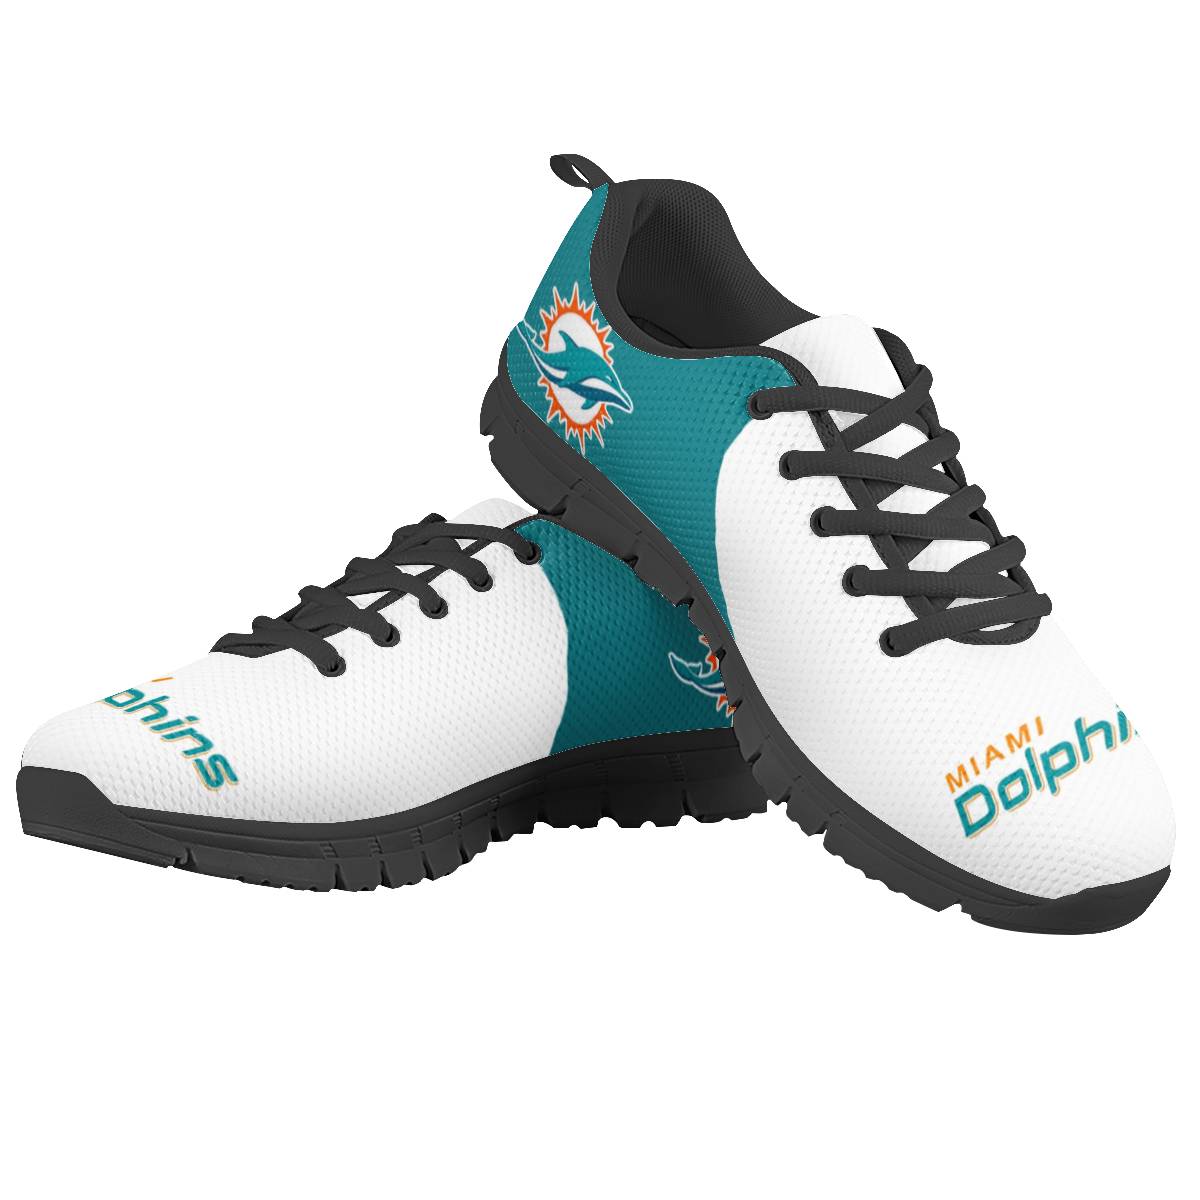 Men's Miami Dolphins AQ Running Shoes 001